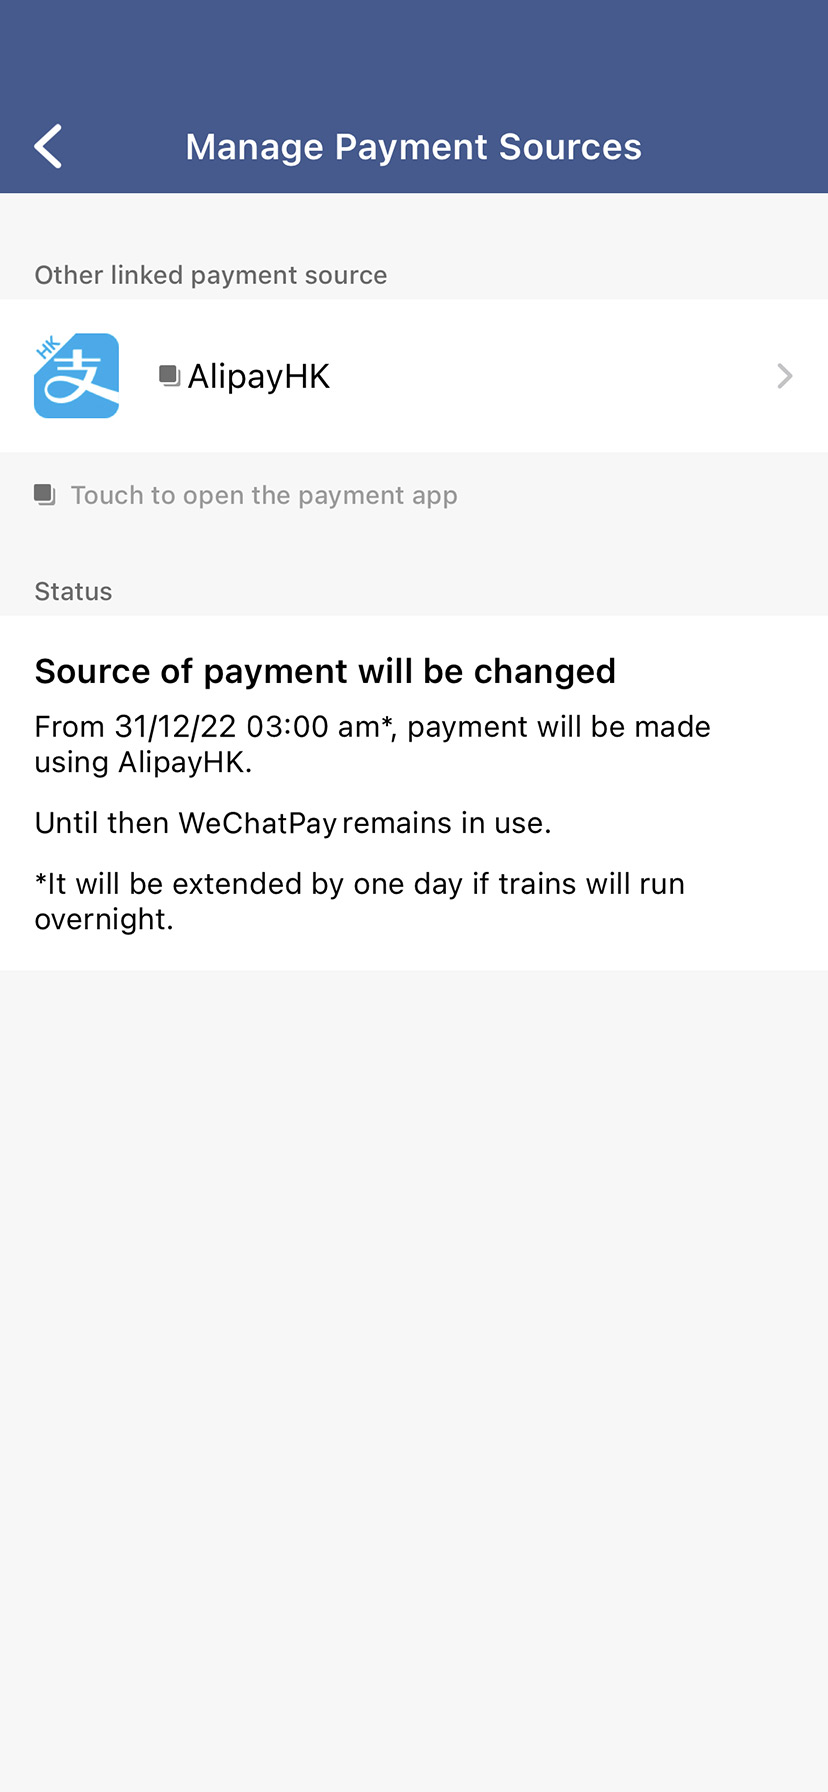 The source of payment will be changed the next
                                                                day* *The
                                                                arrangement will be extended by one day if trains will run
                                                                overnight the day before